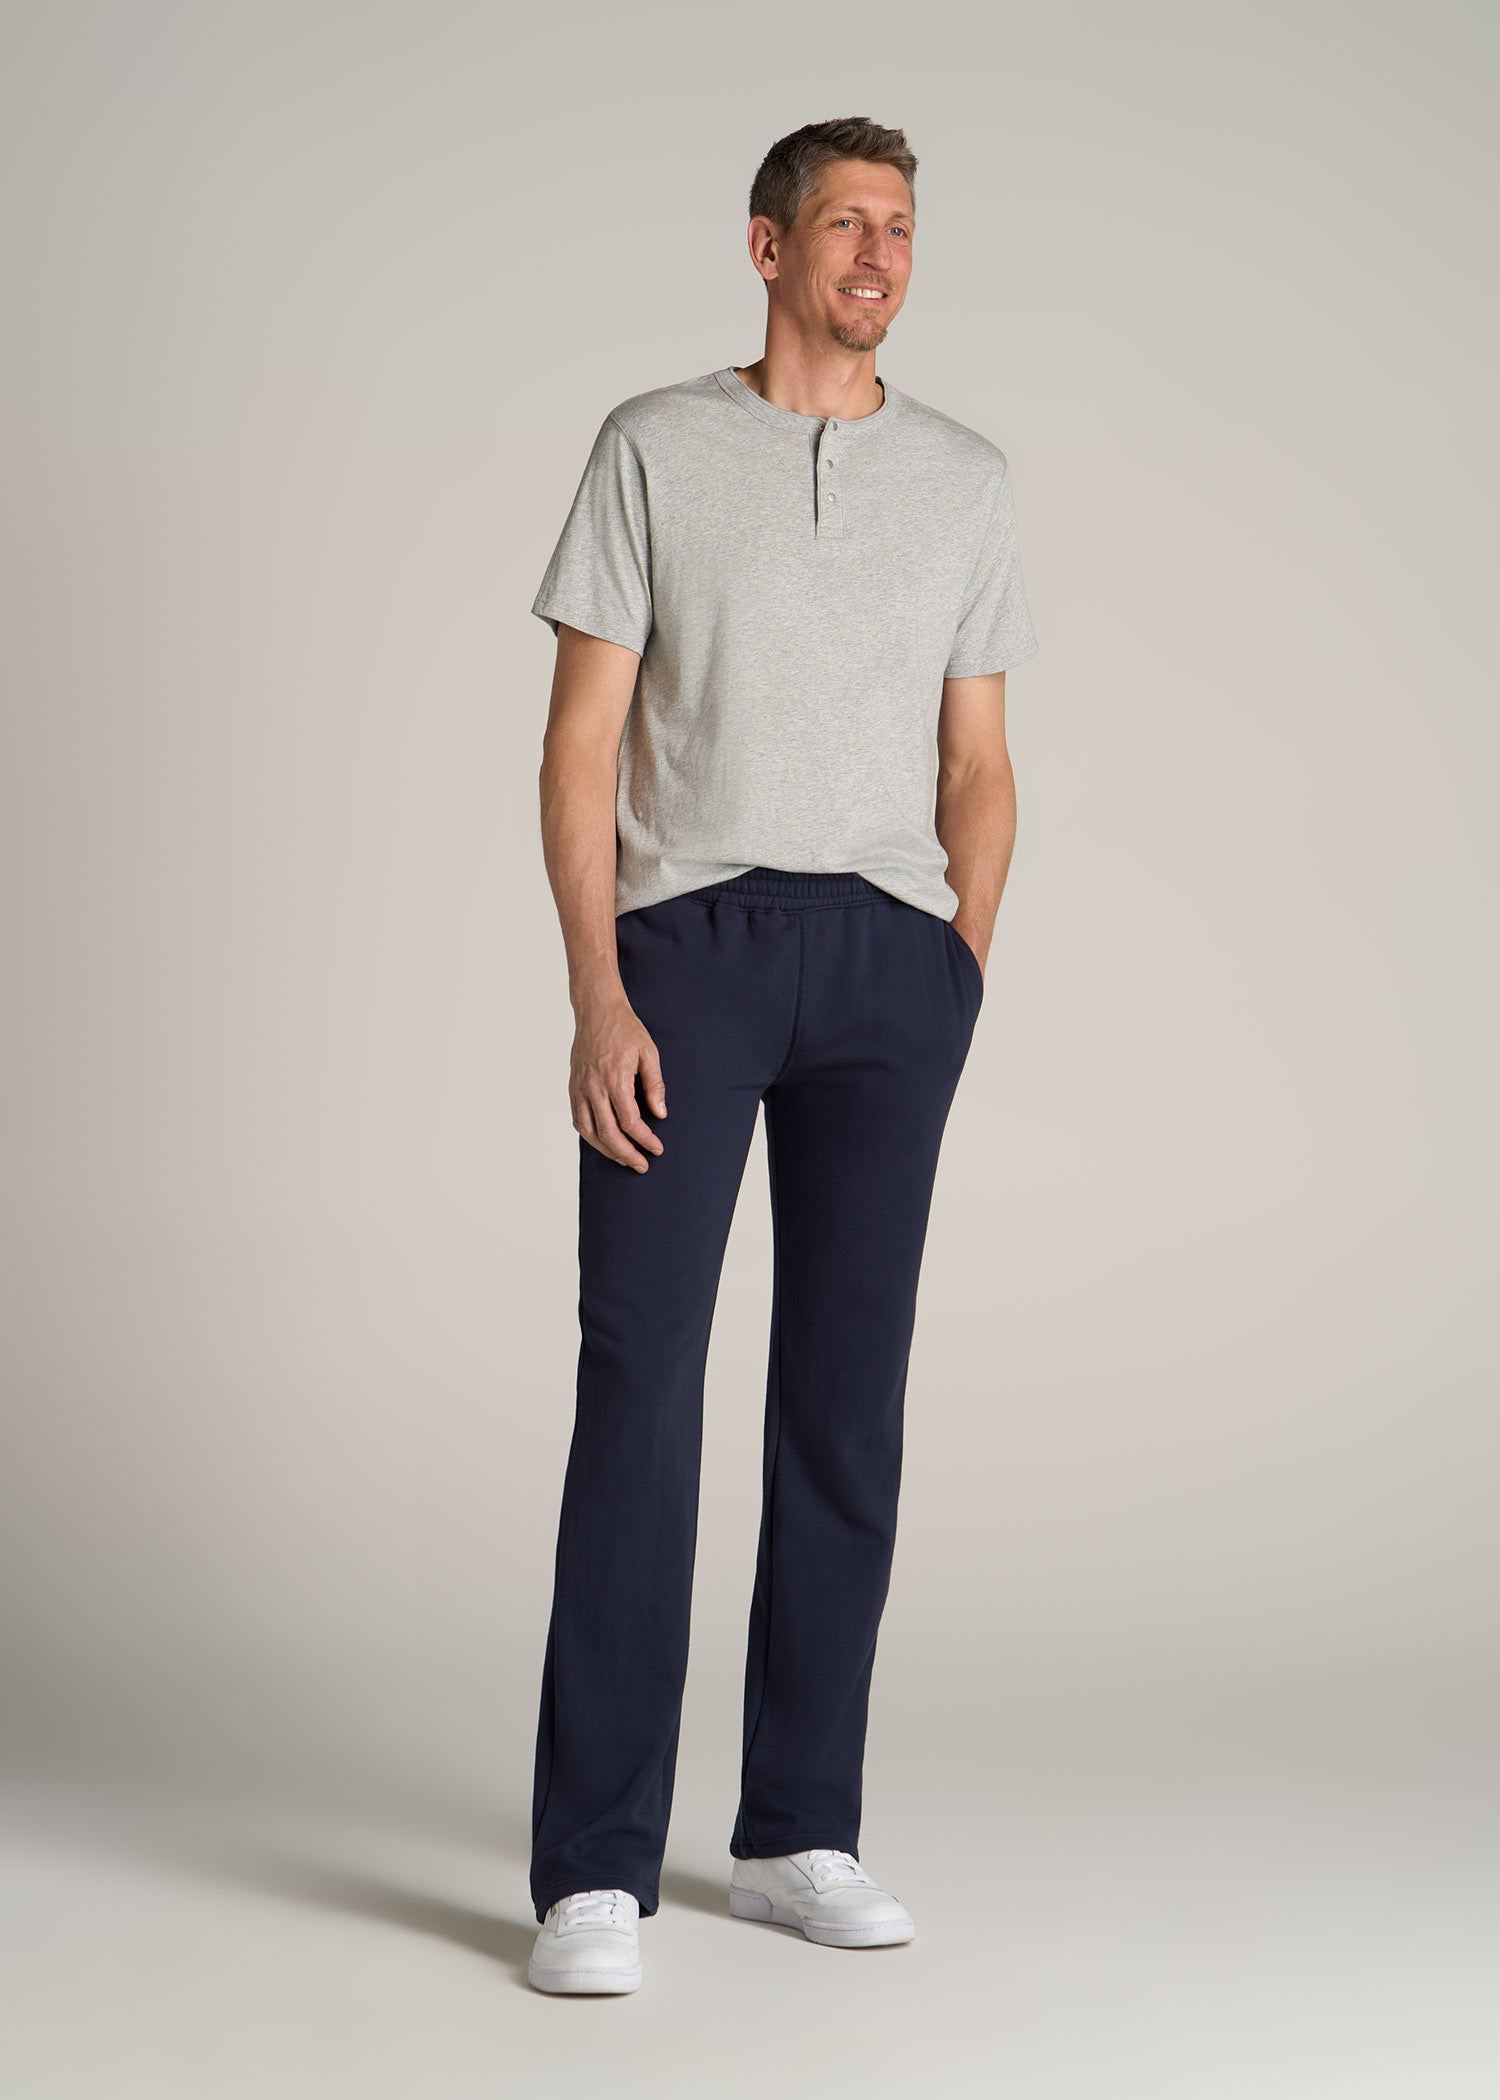 Wearever French Terry Sweatpants for Tall Men in Navy